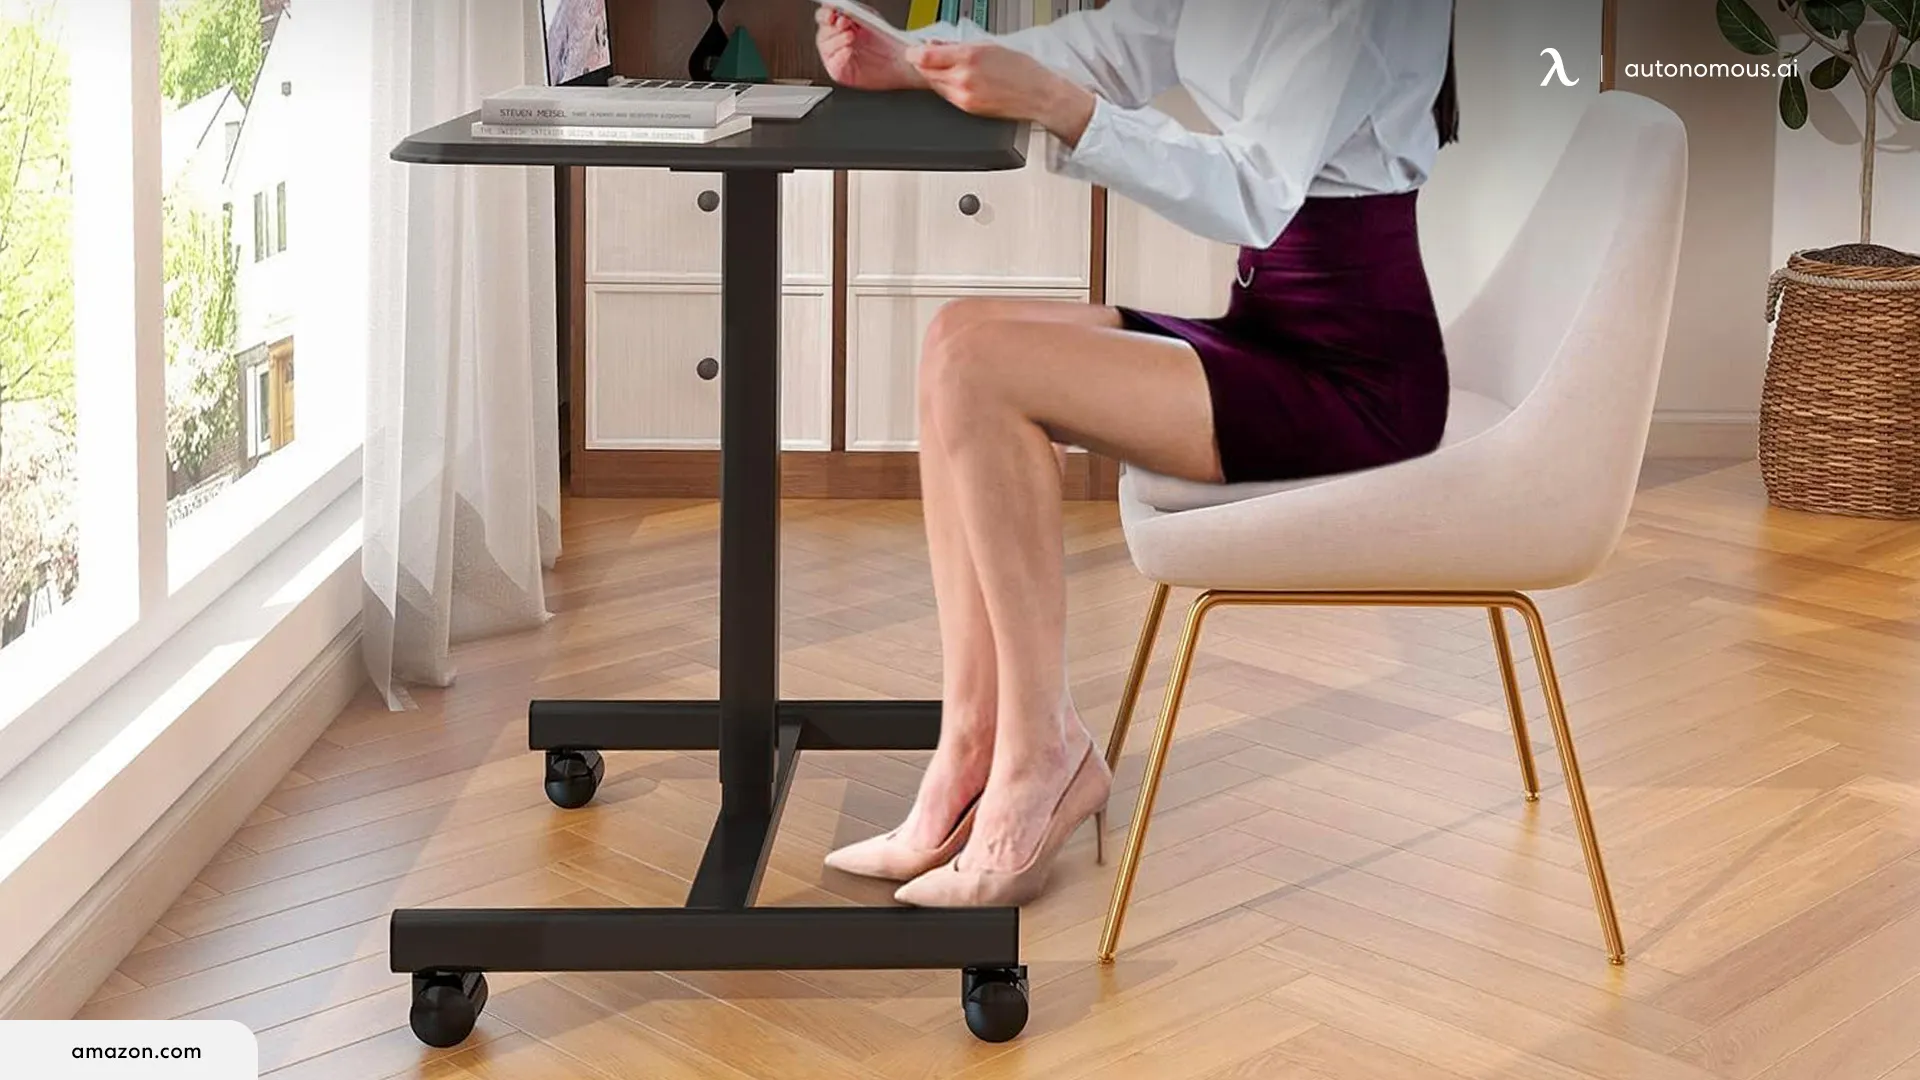 Stability Issues of rolling adjustable desk